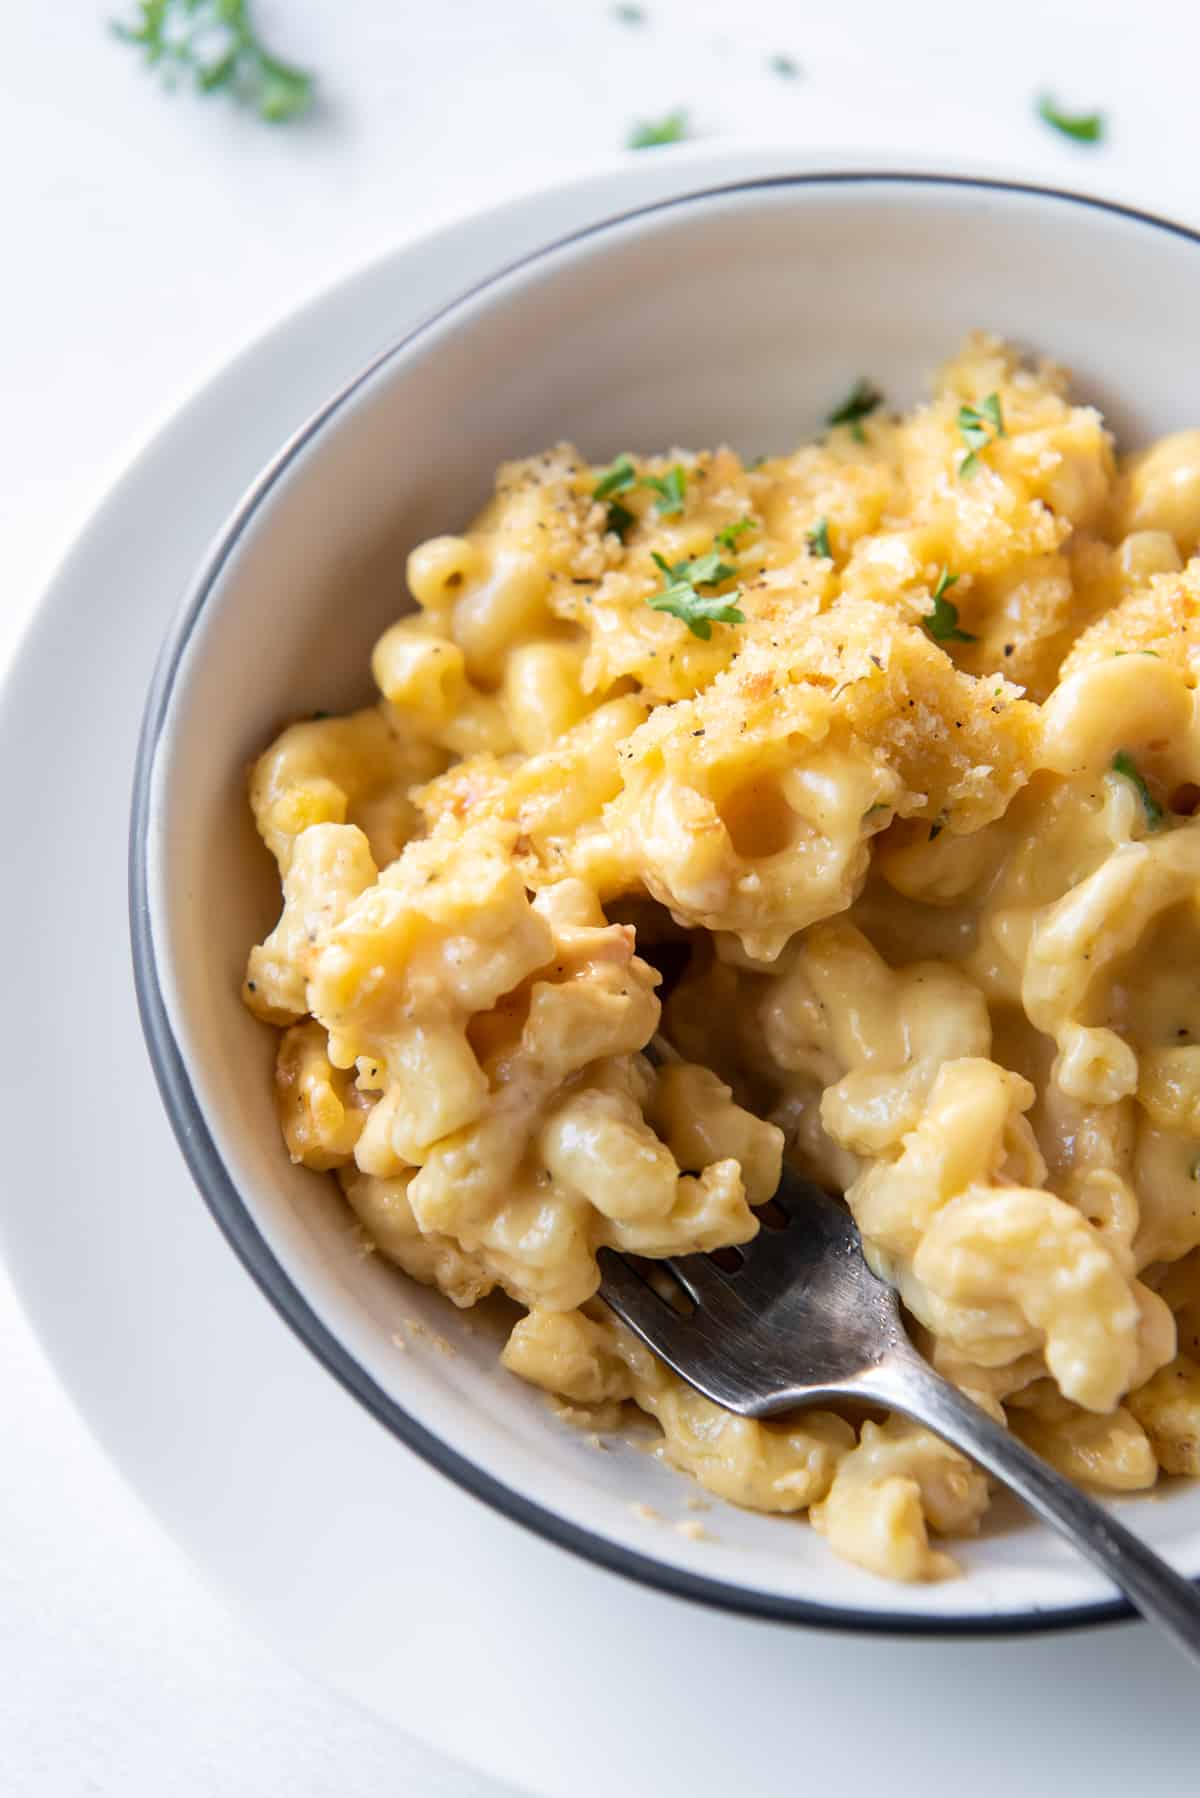 Macaroni and cheese in a bowl with a fork.